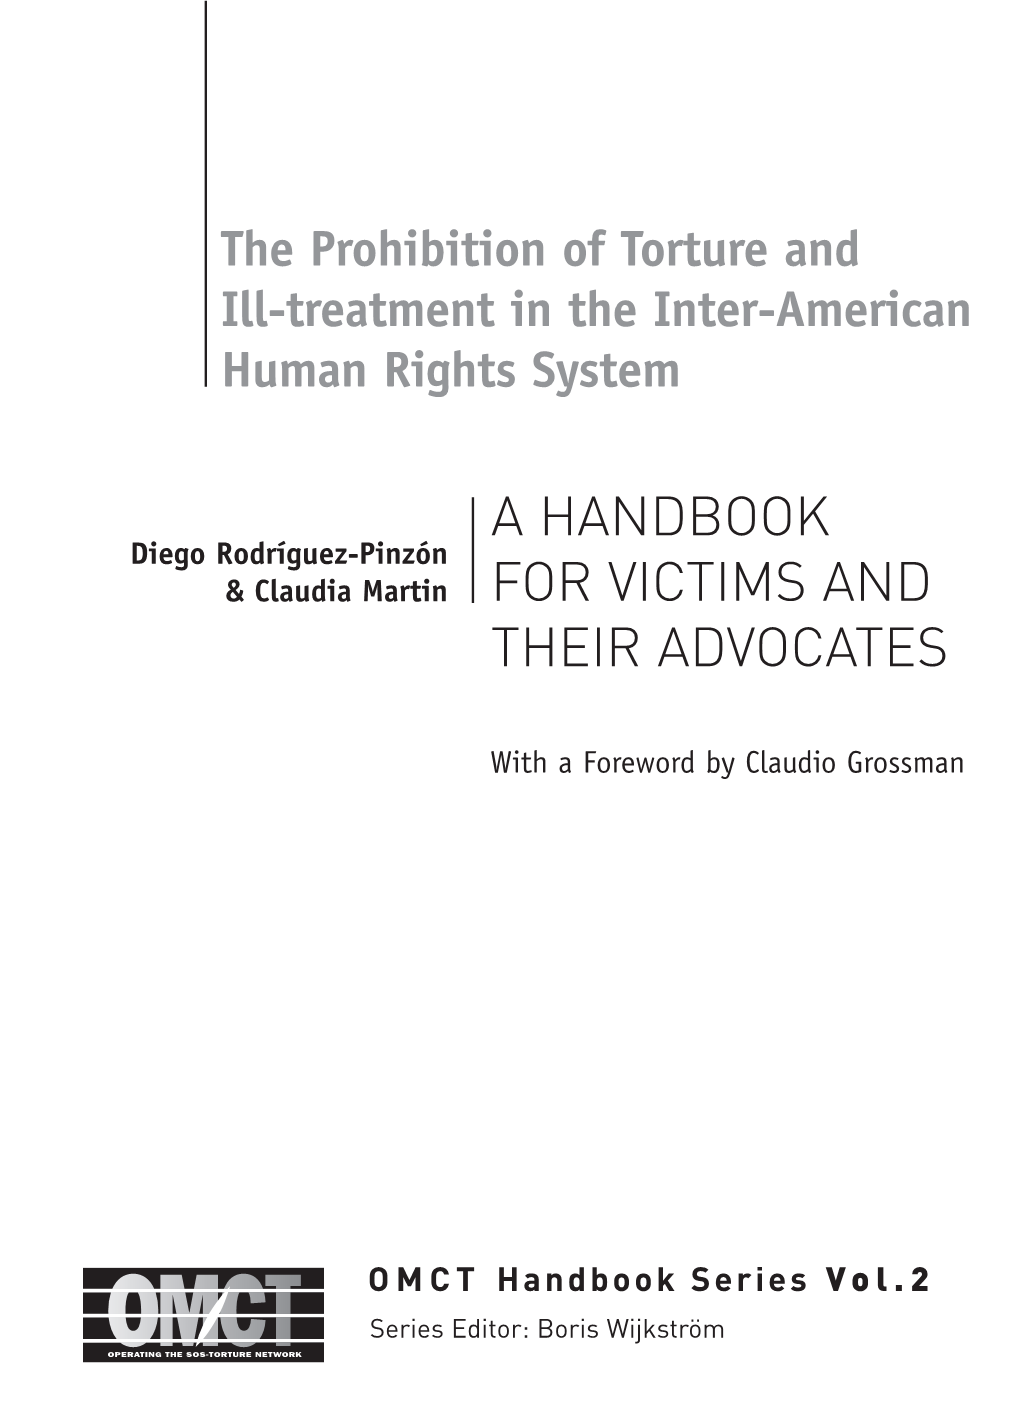 The Prohibition of Torture and Ill-Treatment in the Inter-American Human Rights System